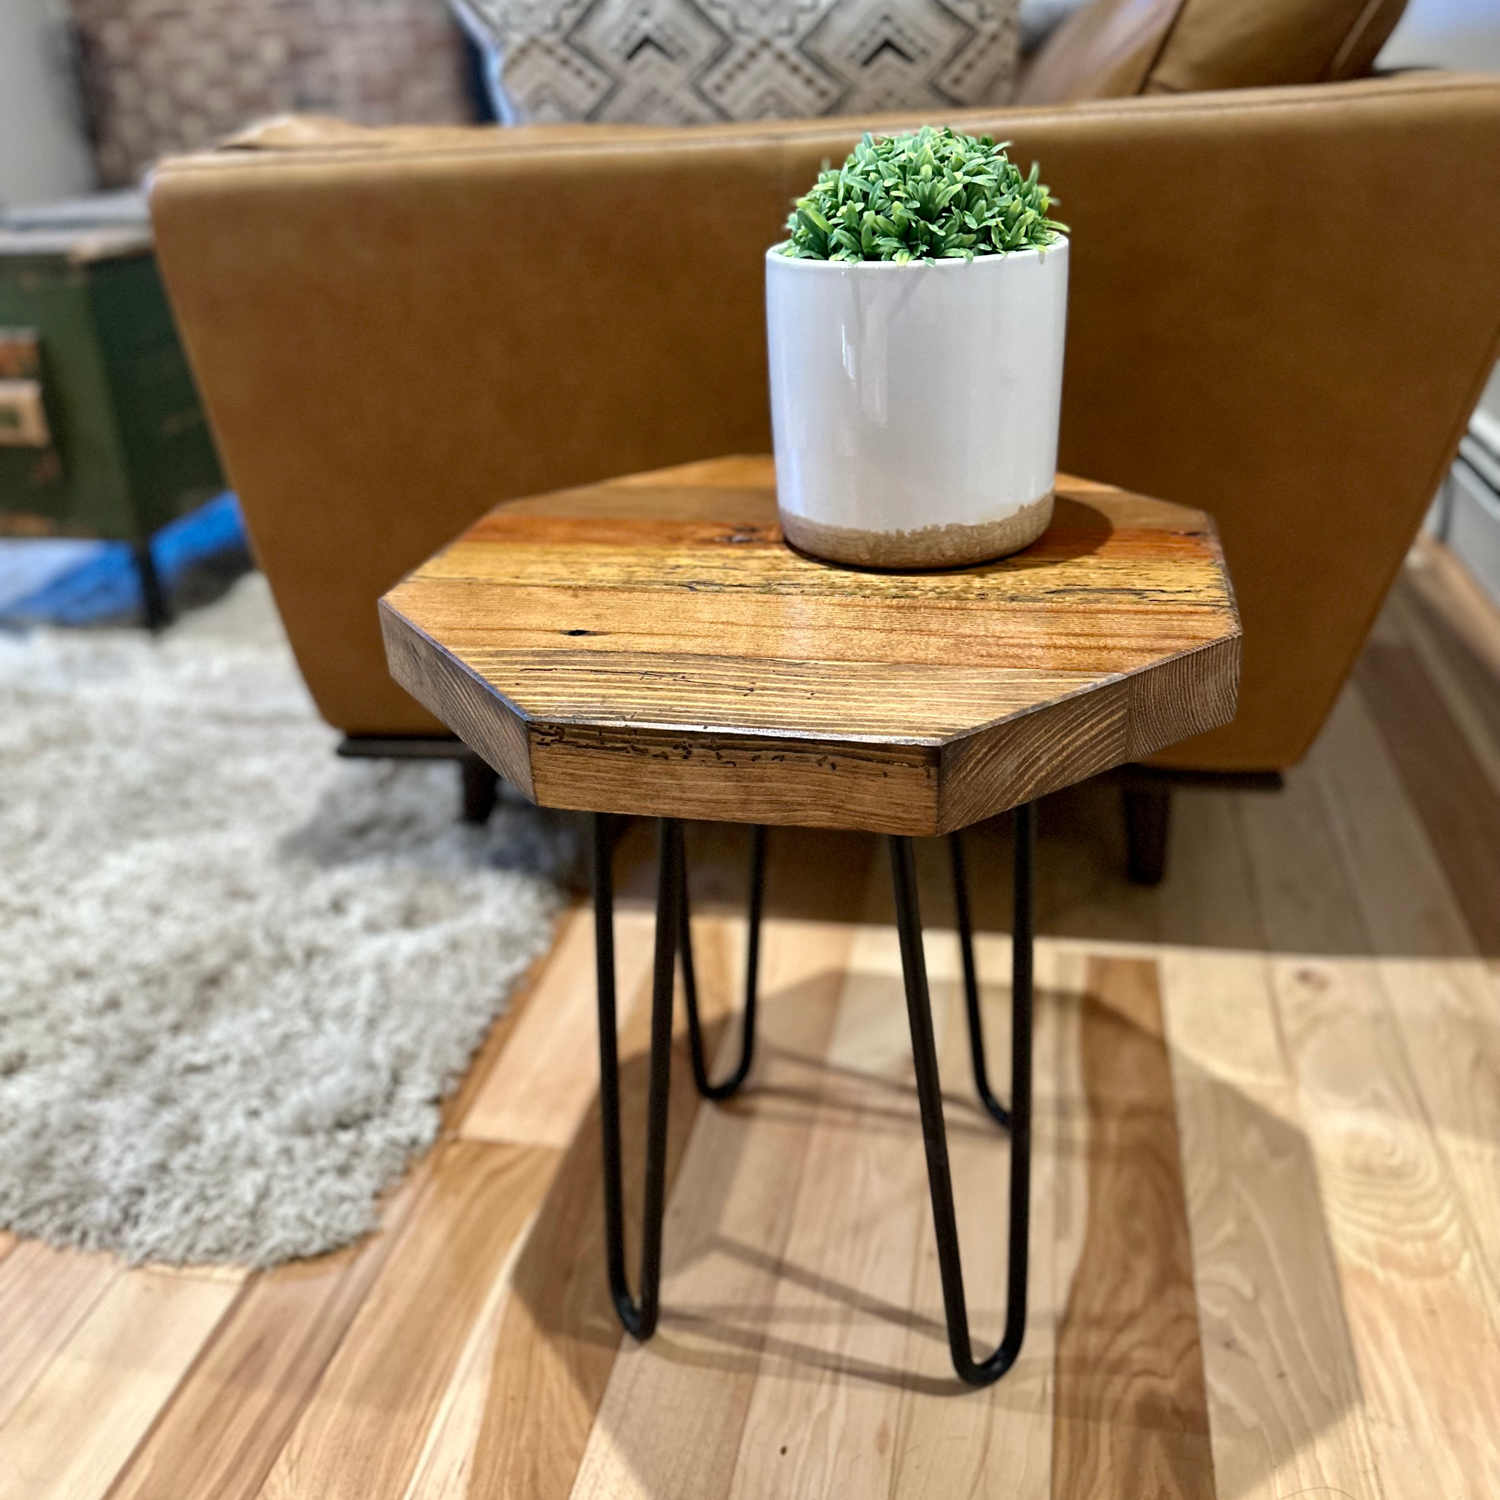 a reclaimed wood table in an octagonal shape and early american finish. The table is supported by four hairpin legs and has a small plant displayed on top. The table is shown next to a couch as a side table.